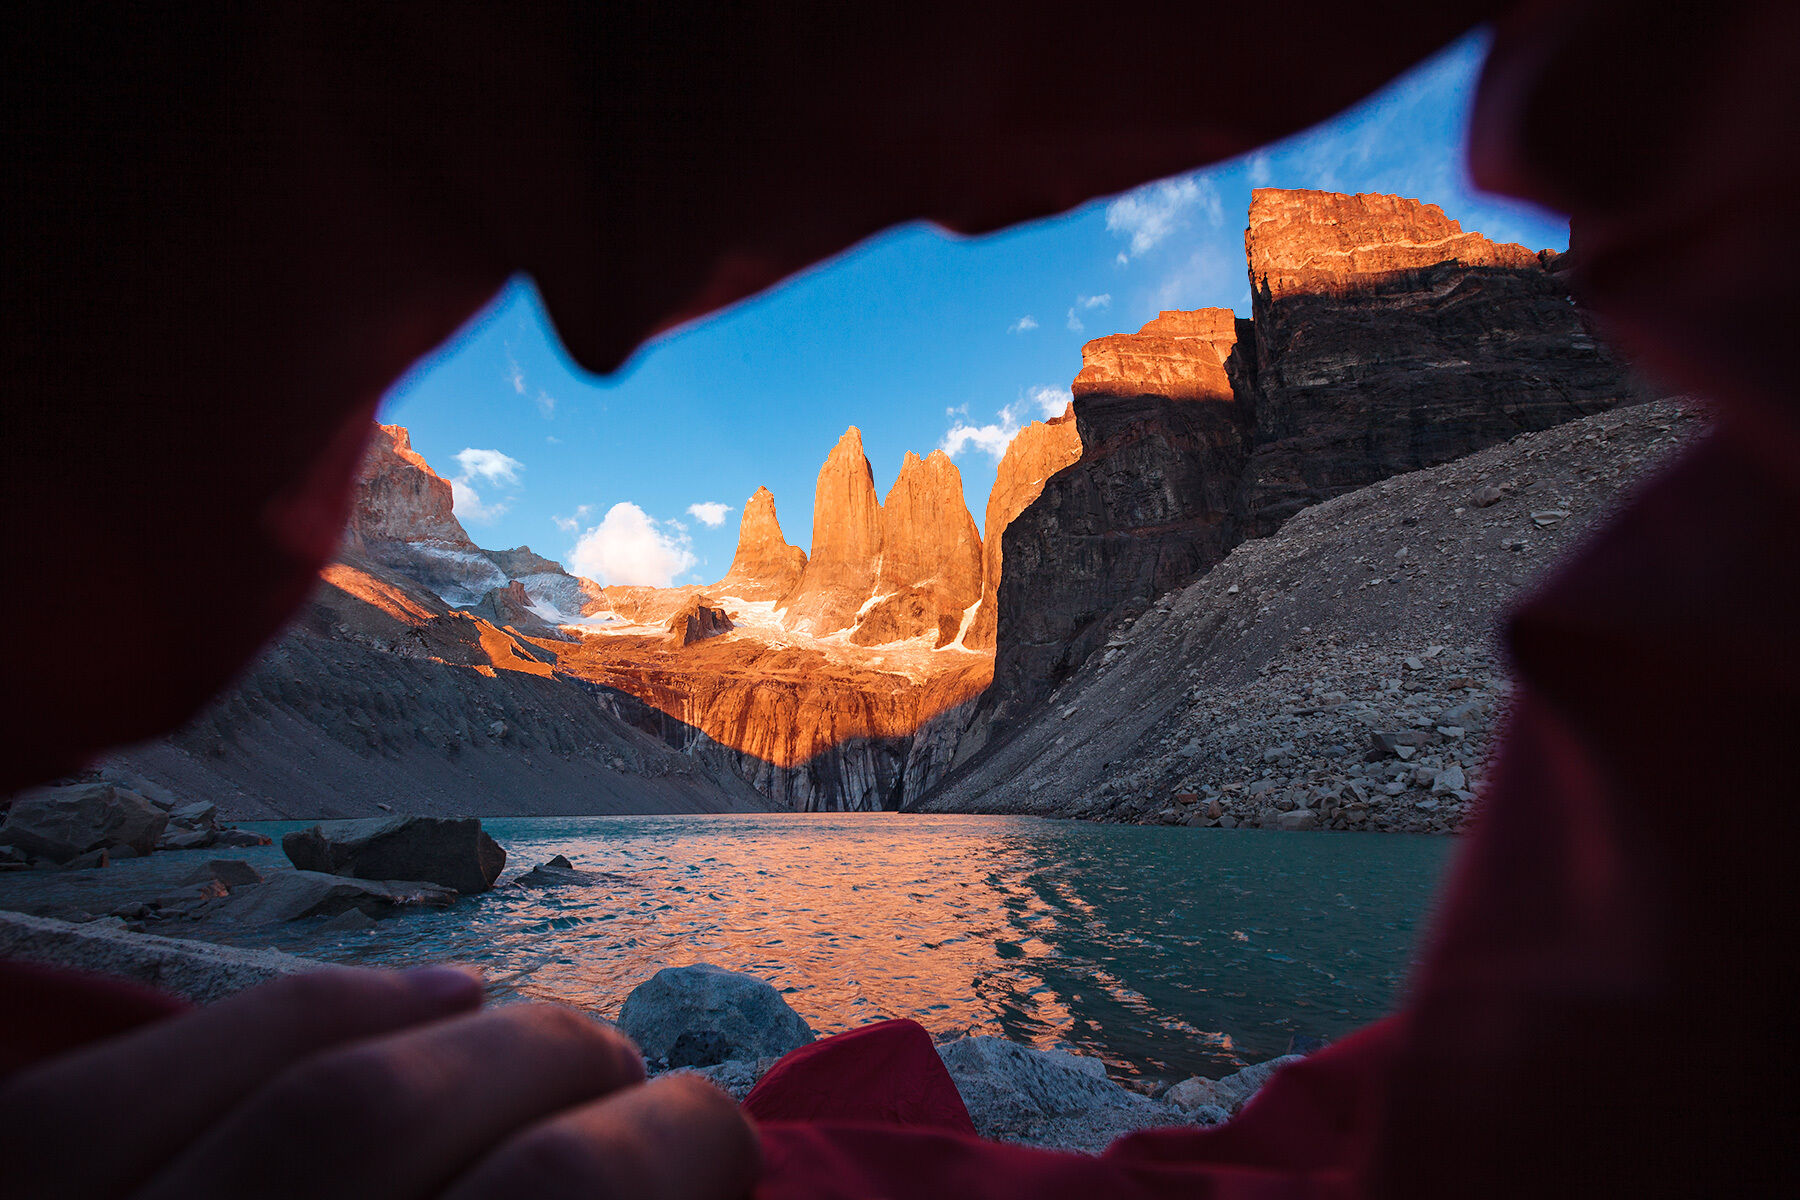 Landscape-oriented color photograph. A very wide shot from the perspective of inside a sleeping bag, the edges of the opening of which frame the entire shot, a deep red, with a left hand holding open the bottom edge. The feet of the person in the sleeping bad can be seen just in front of the opening at the bottom center of the frame. The scene beyond is a broad landscape of a set of three tall, prominent rock towers piercing a brilliant blue sky at the head of a small body of water which stretches out toward the feet of the sleeping back. There is a broad streak of bright orange sunlight coming from out of frame at the left illuminating the towers and the tips of some surrounding rock, and the middle ground is in cool shadow. A band of bright orange and pink streak across the center of the body, reflecting off the towers at the opposite end. Some small patches of snow can be seen at the base of the towers, and a handful of soft white clouds are in the sky beyond.